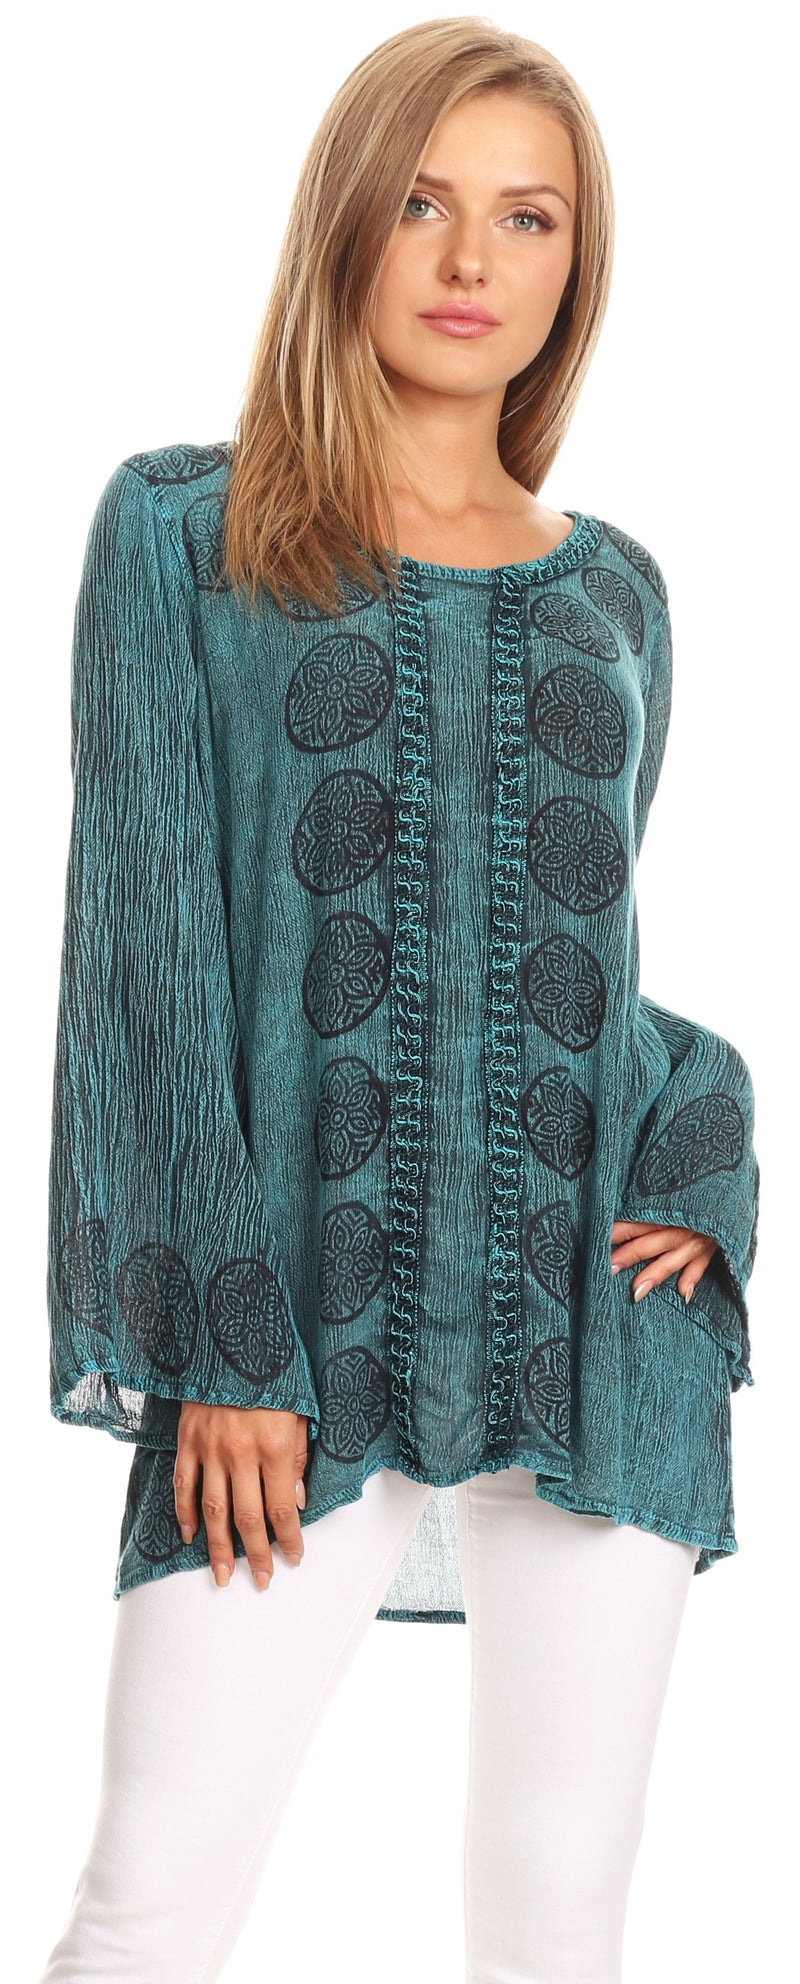 Sakkas Jayla Long Bell Sleeve Stonewashed Embroidered Top with Floral Print